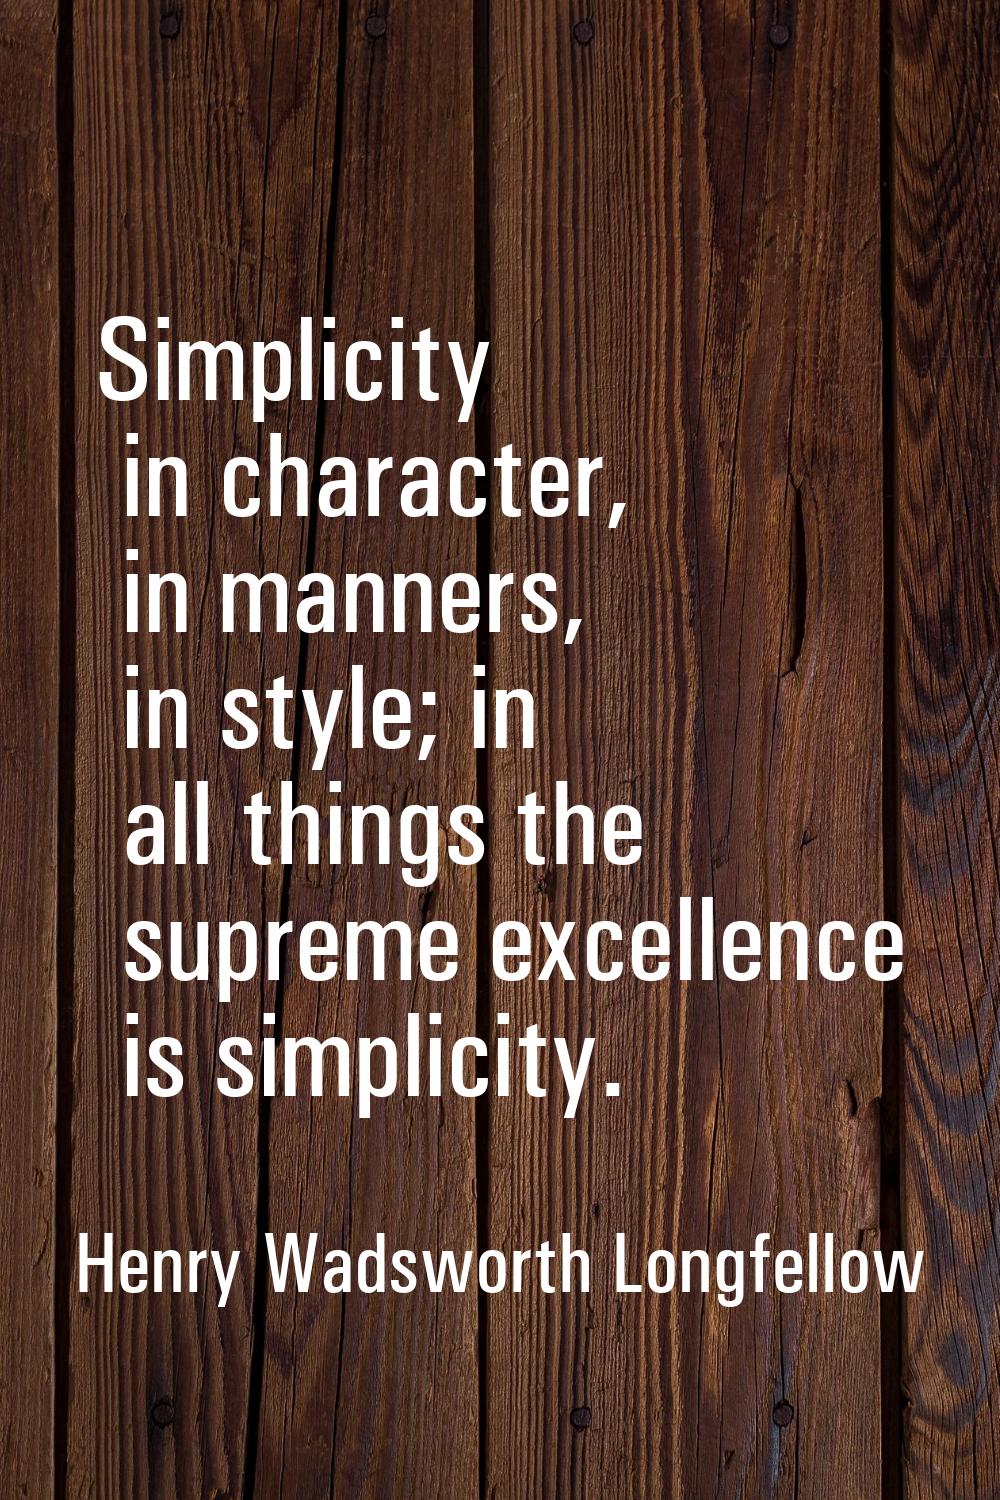 Simplicity in character, in manners, in style; in all things the supreme excellence is simplicity.